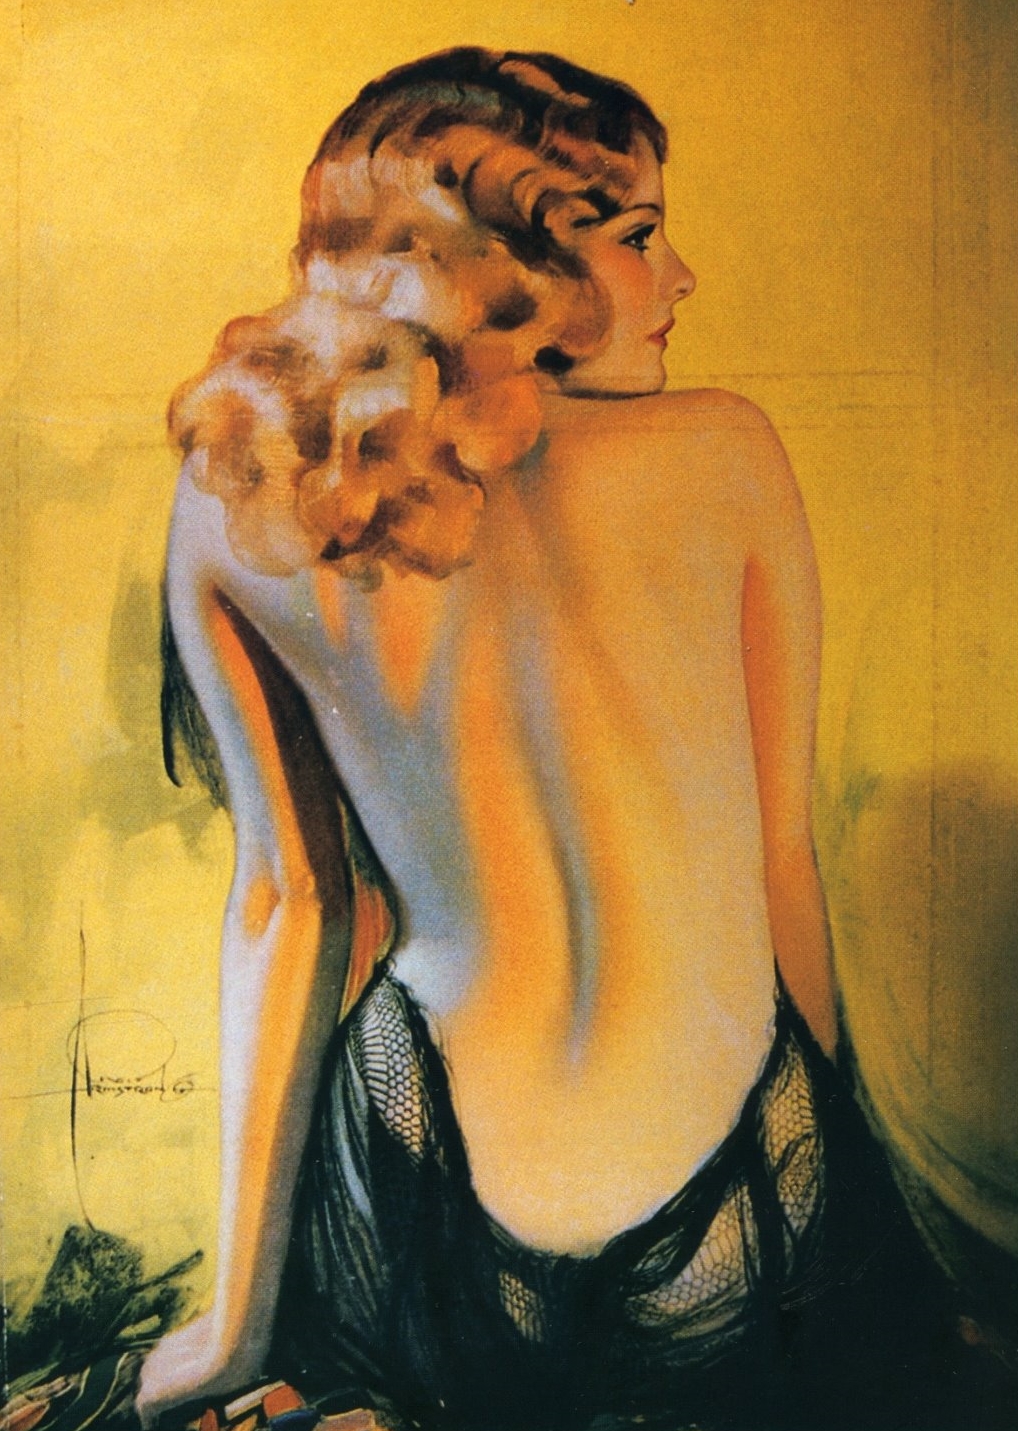 Rolf ARMSTRONG ~ Pin-up Art - Catherine La Rose (21)